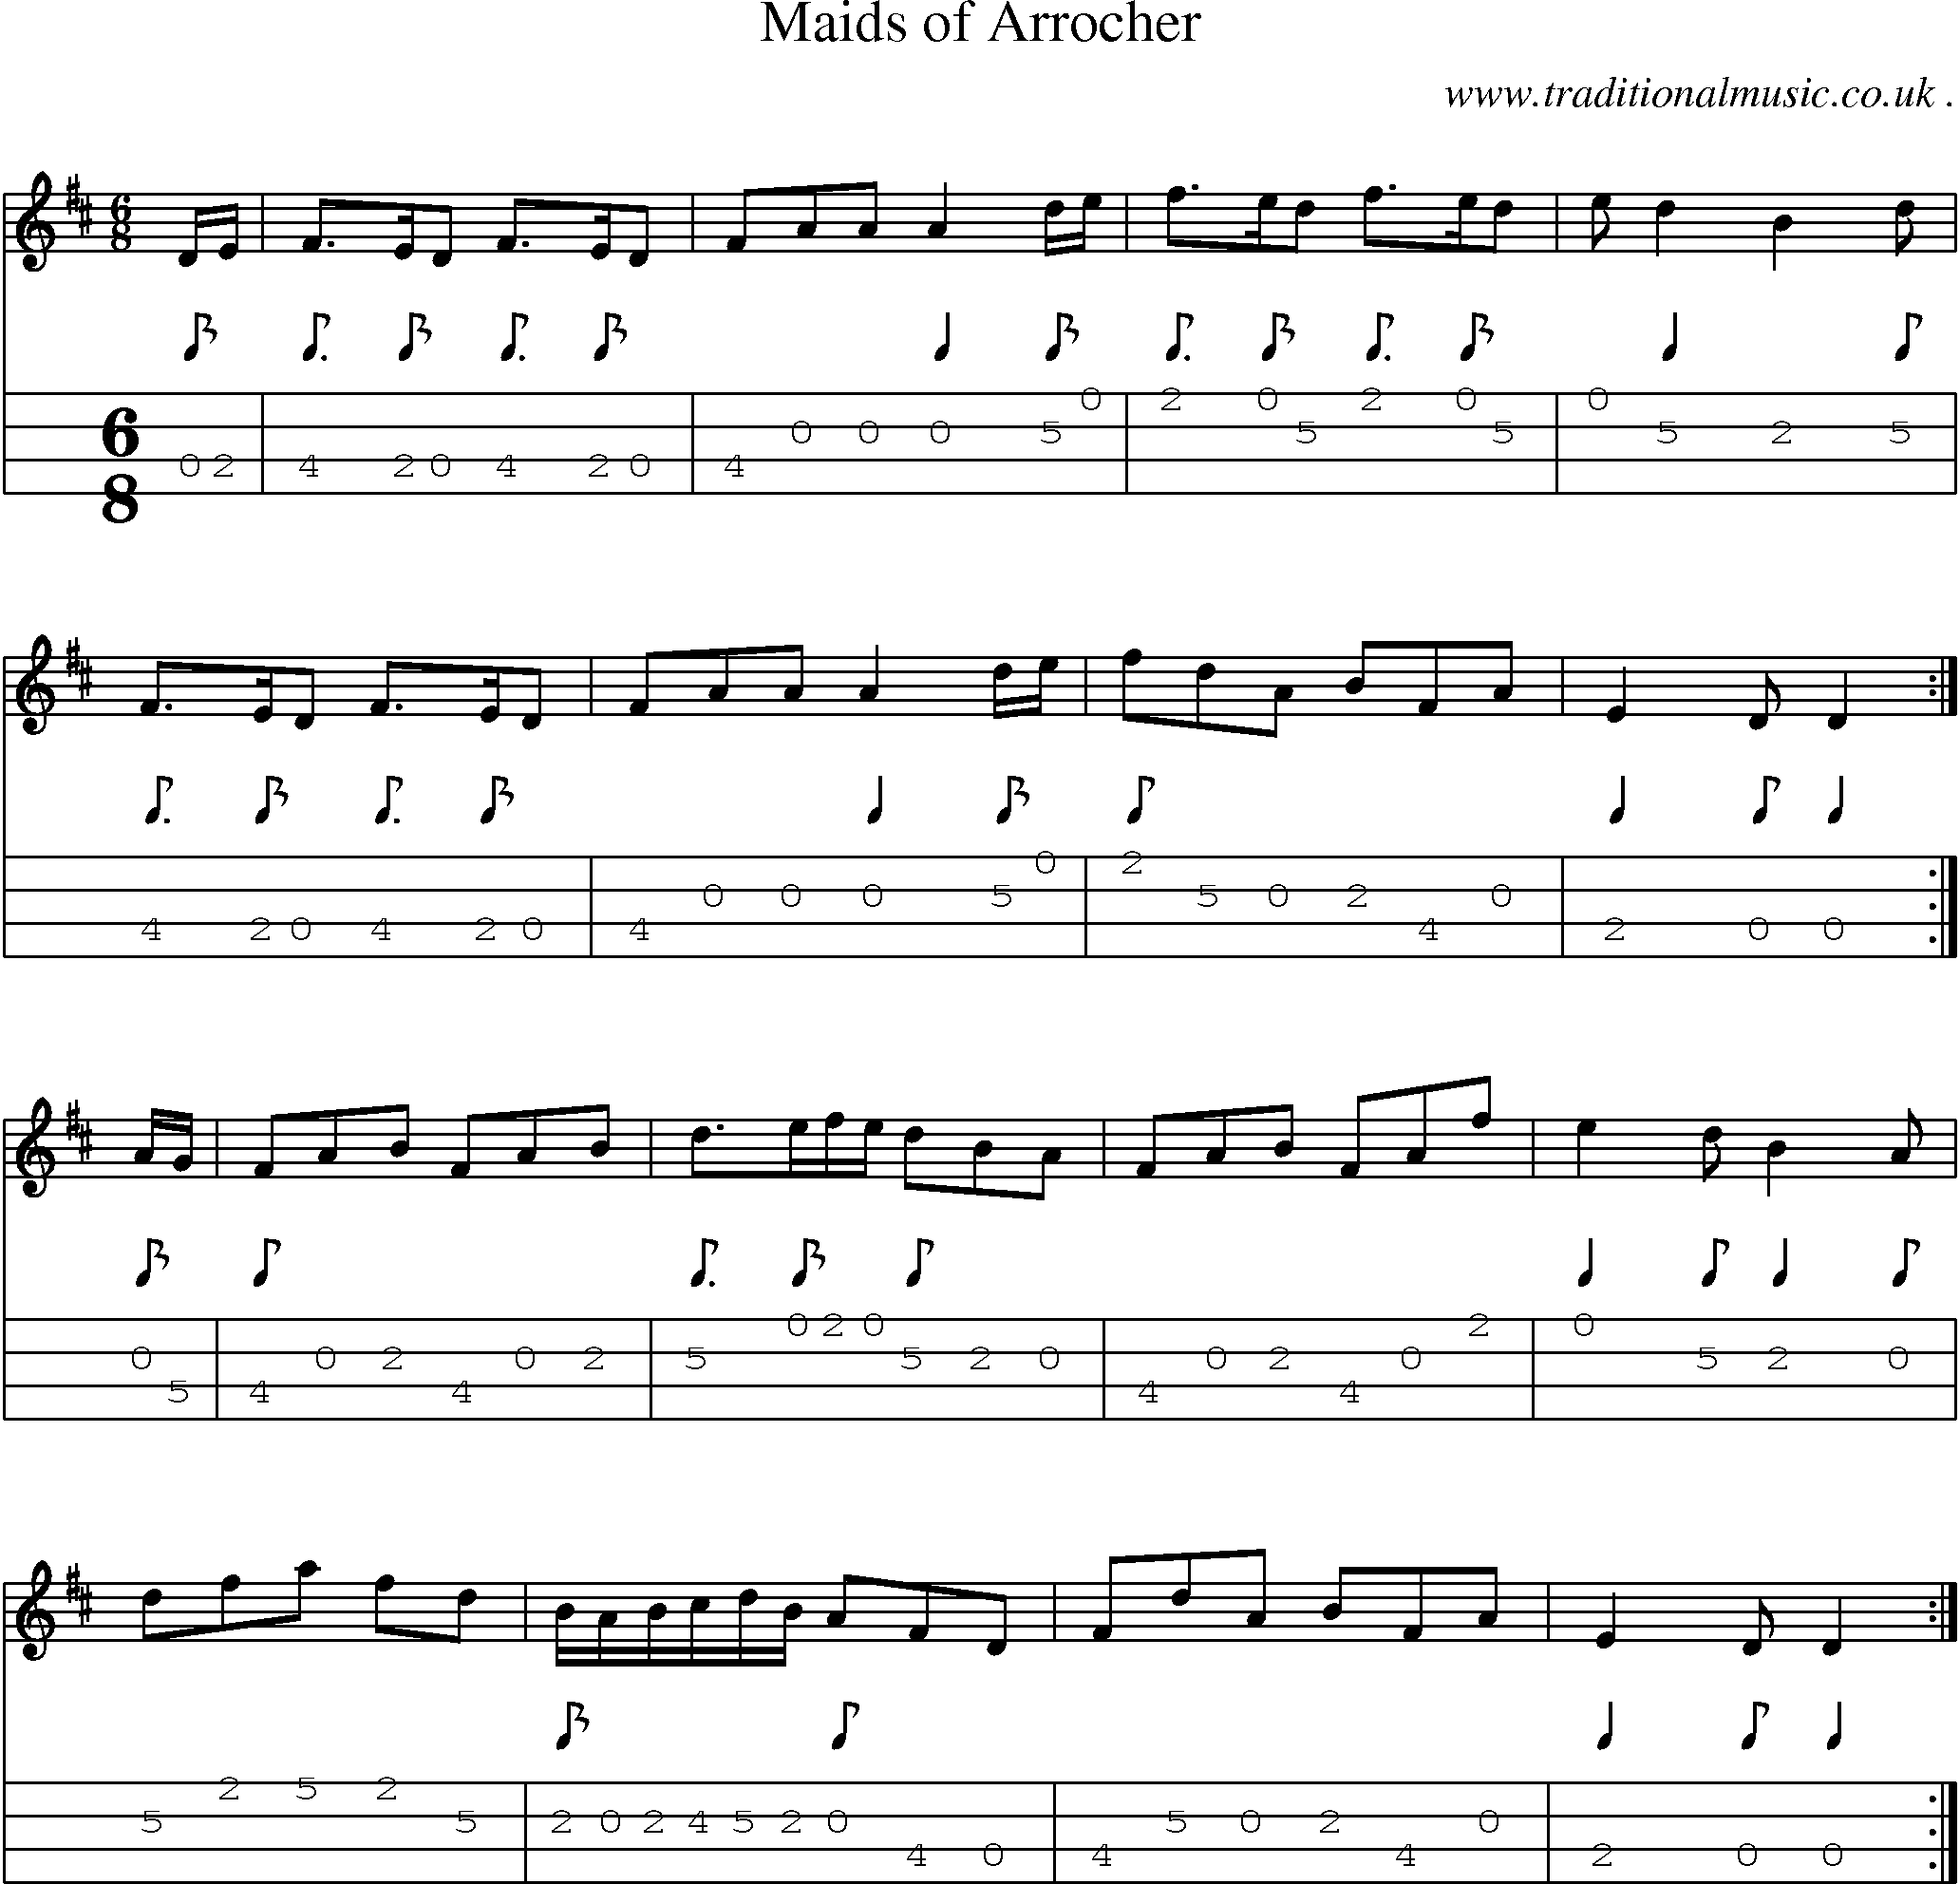 Sheet-music  score, Chords and Mandolin Tabs for Maids Of Arrocher